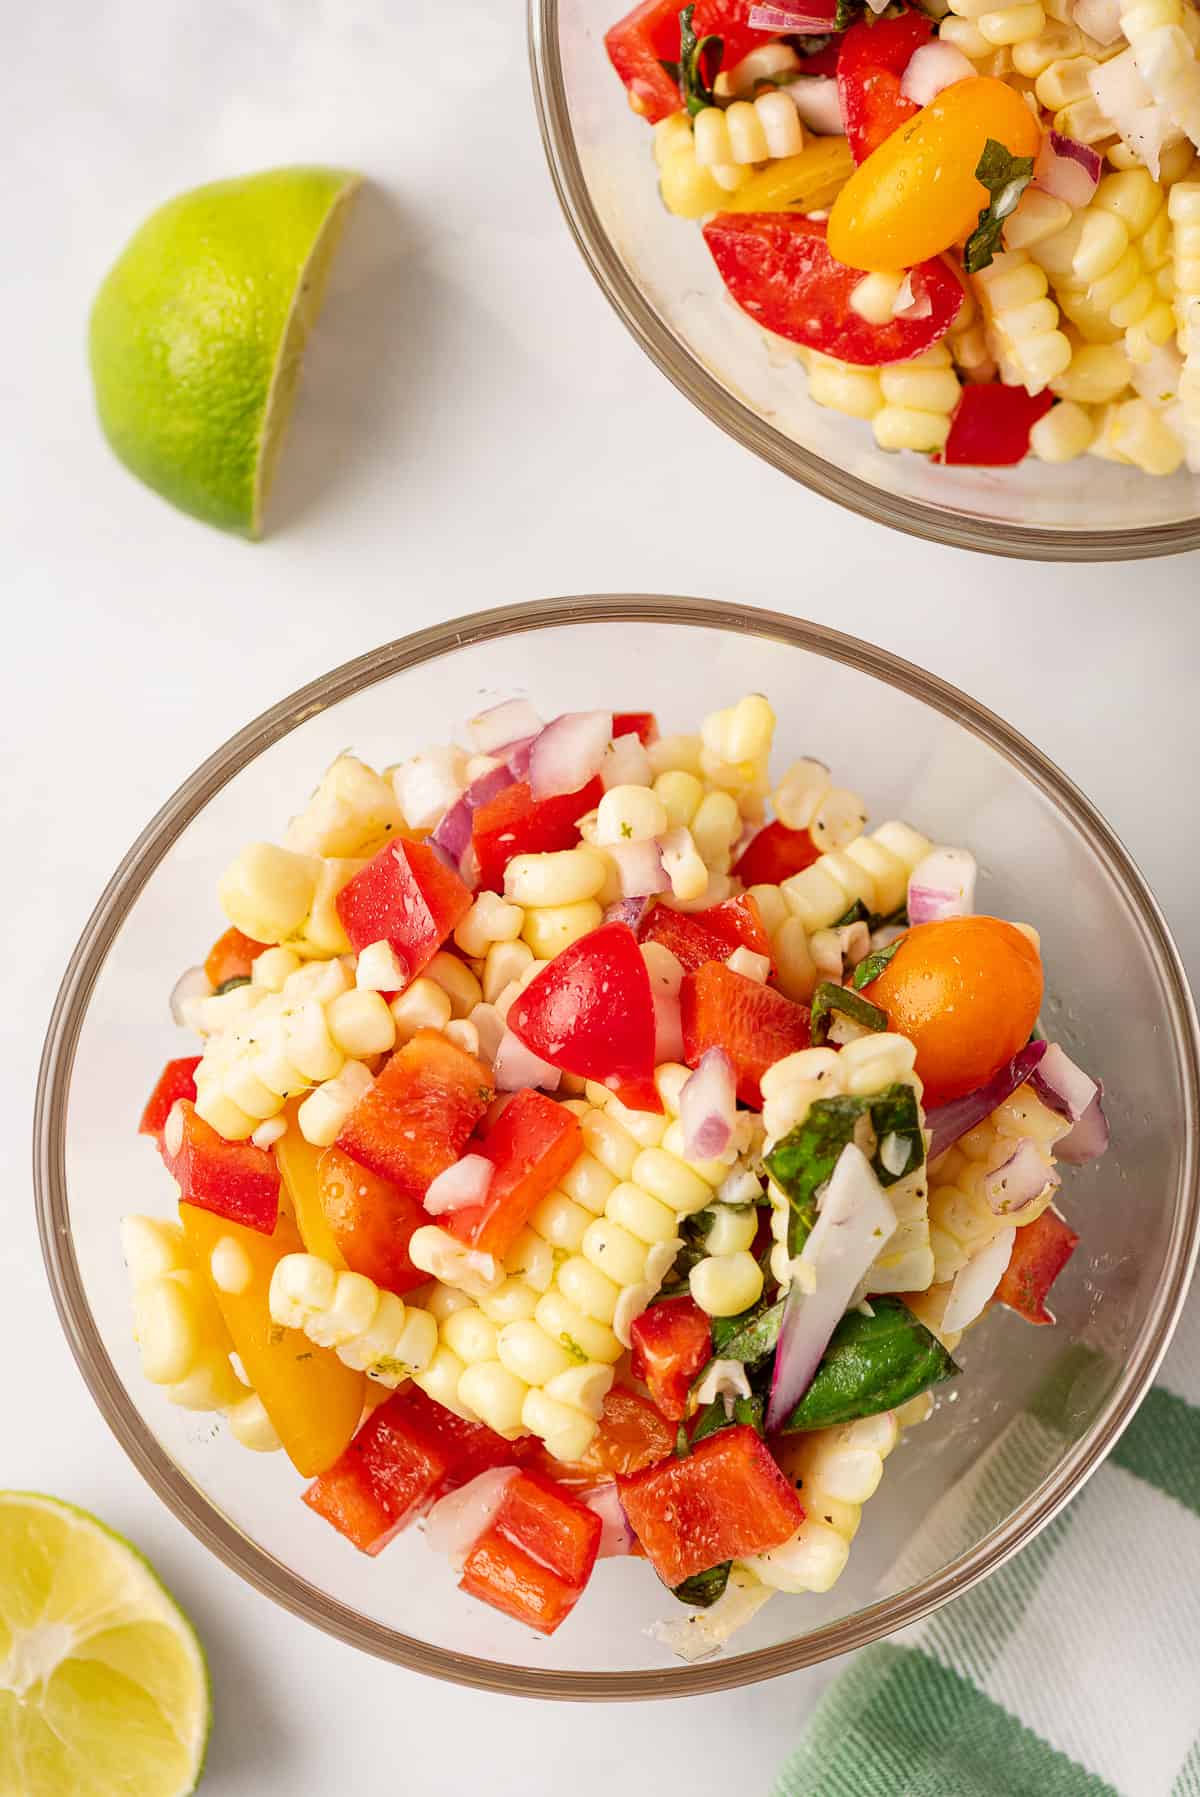 A glass bowl filled with corn and tomato salad